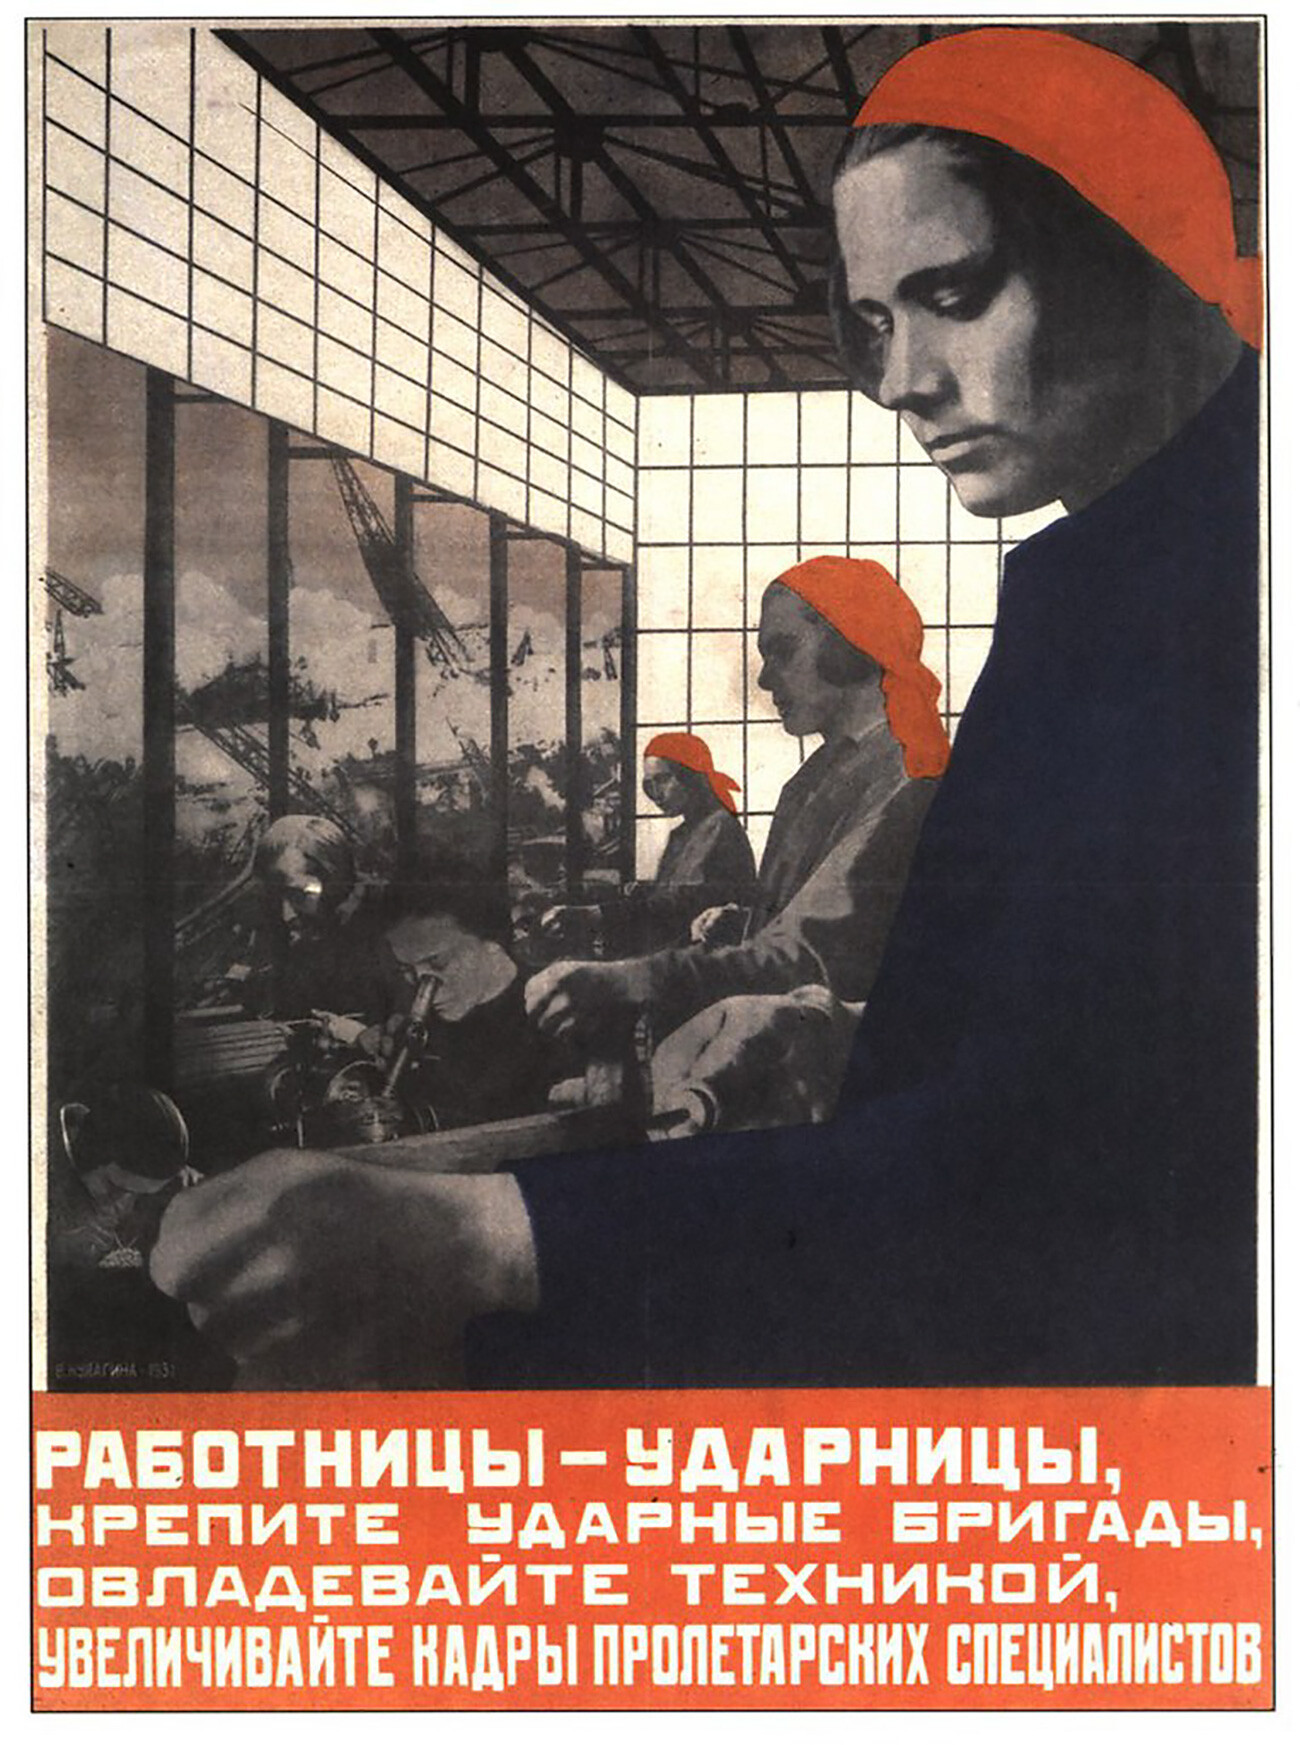 “Female shock workers, reinforce shock brigades, master technology, increase the cadres of proletarian specialists.”